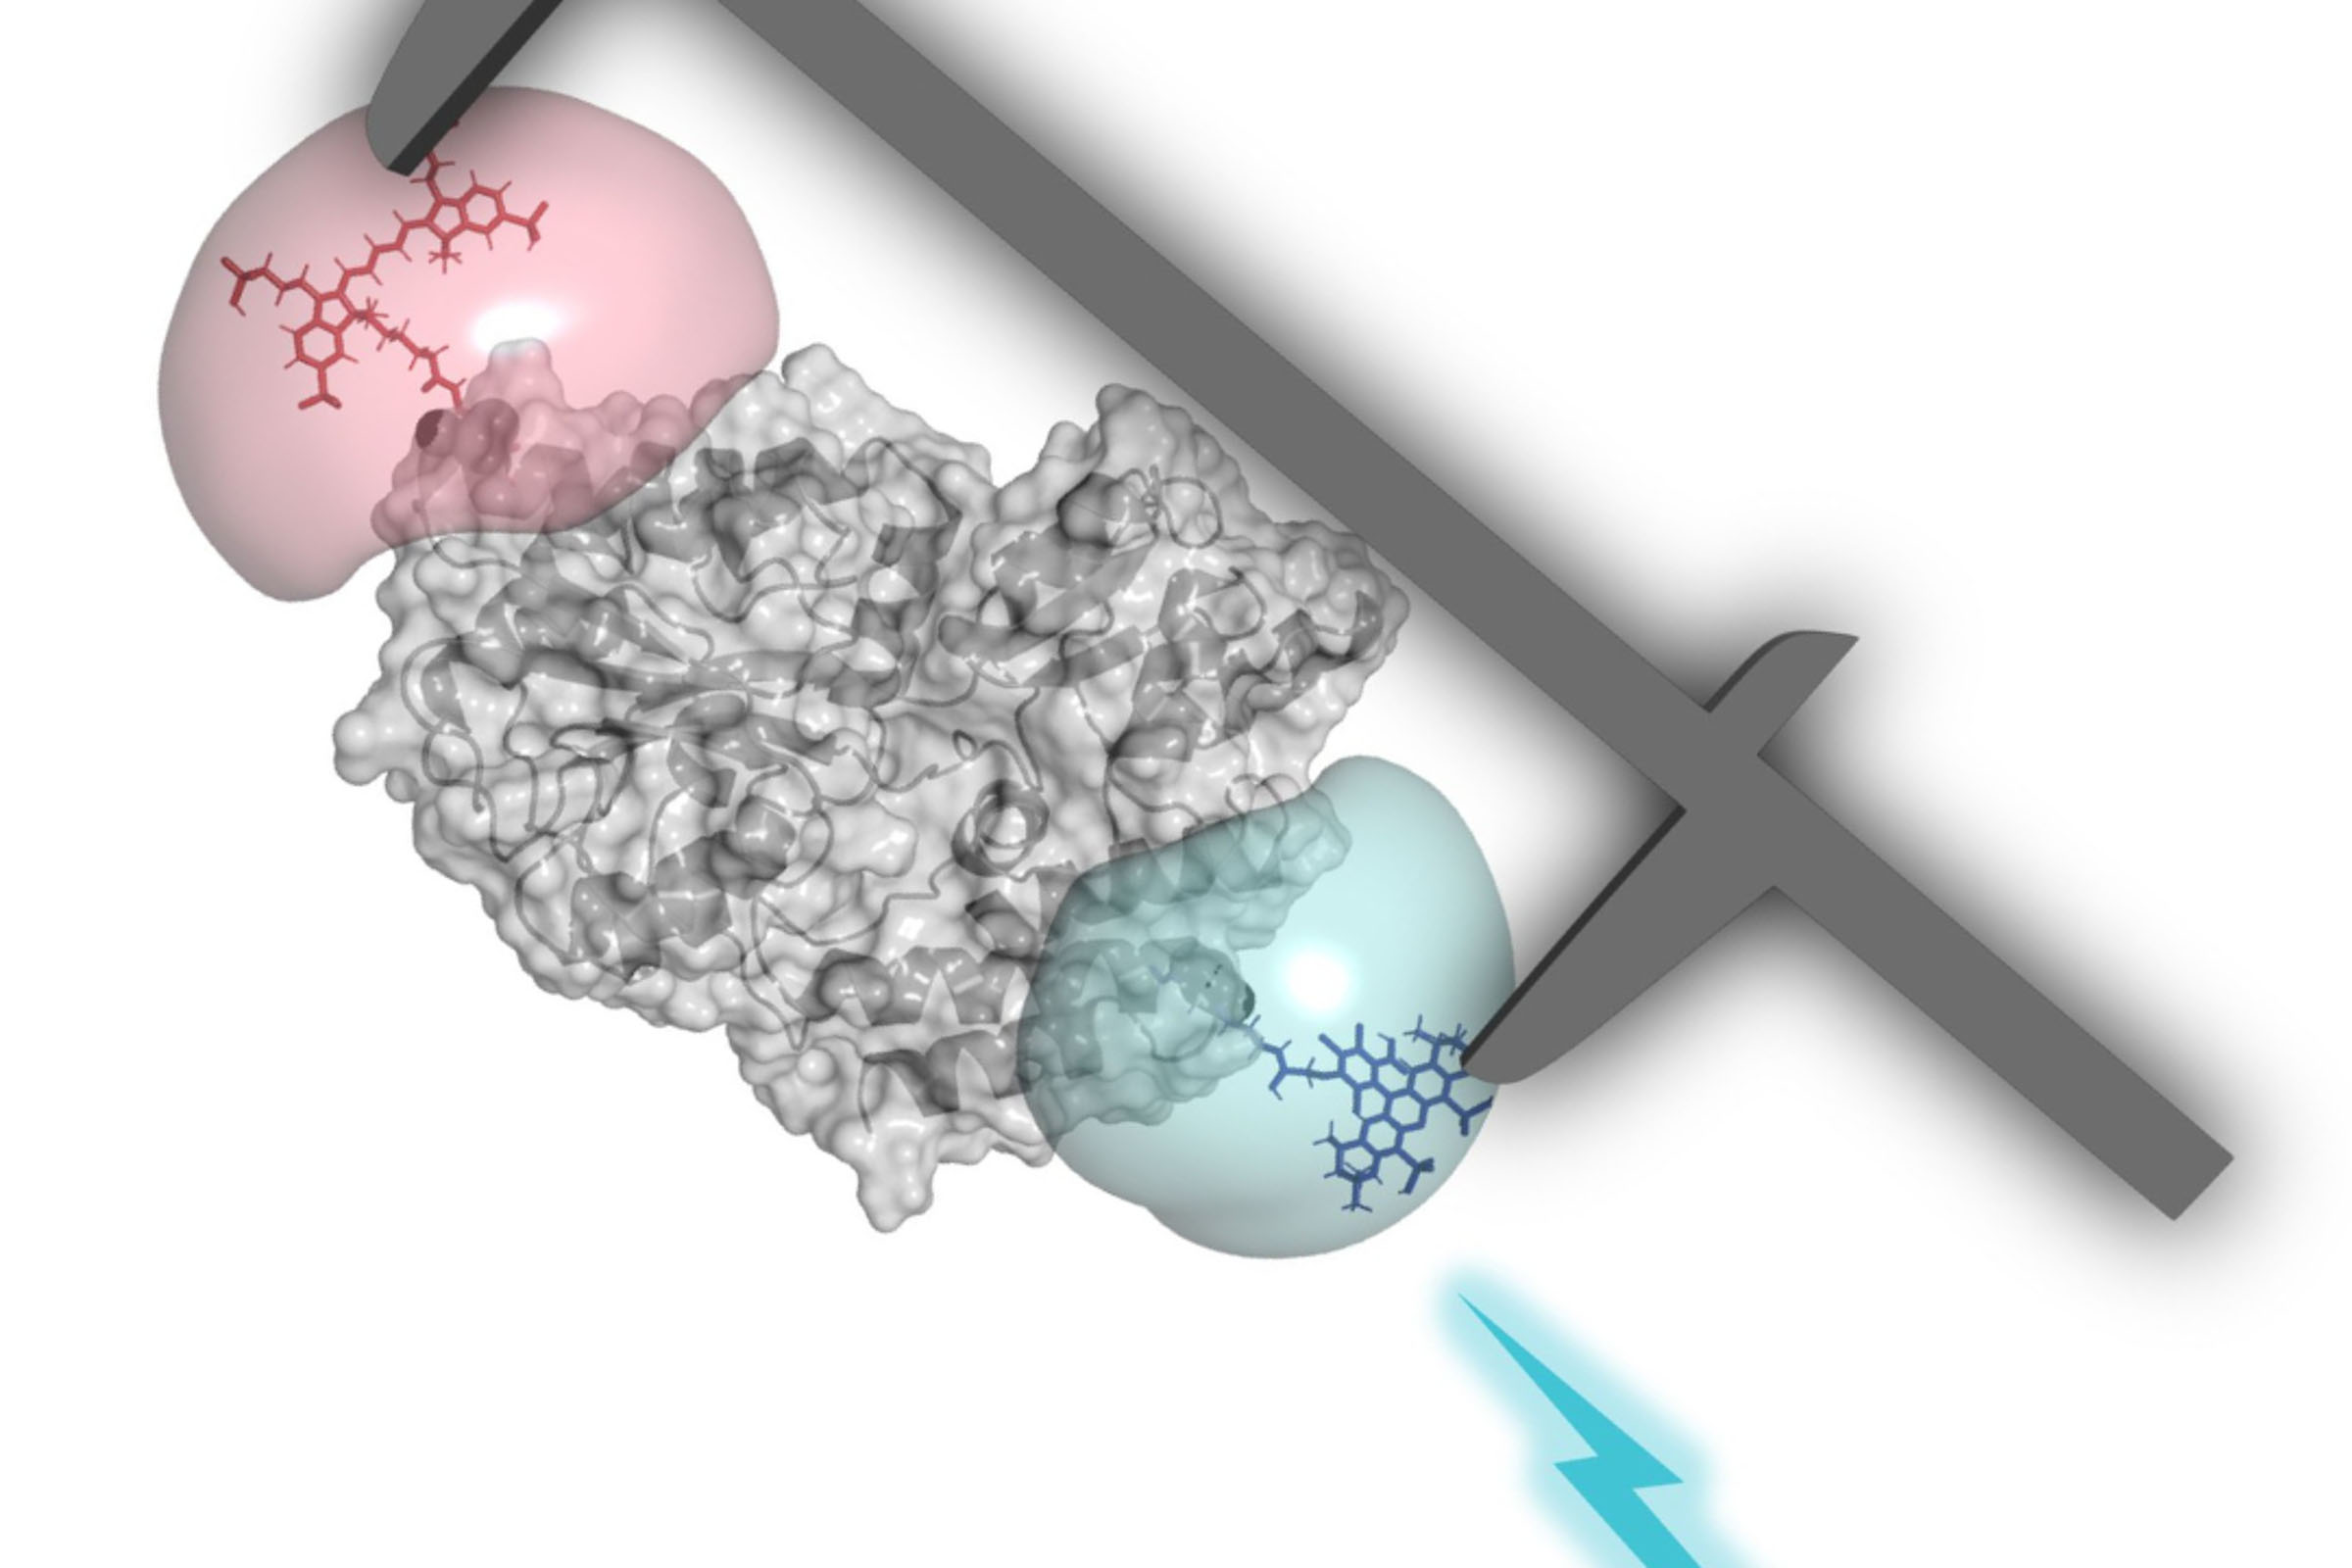 Visualization of the measurement of proteins with the FRET method